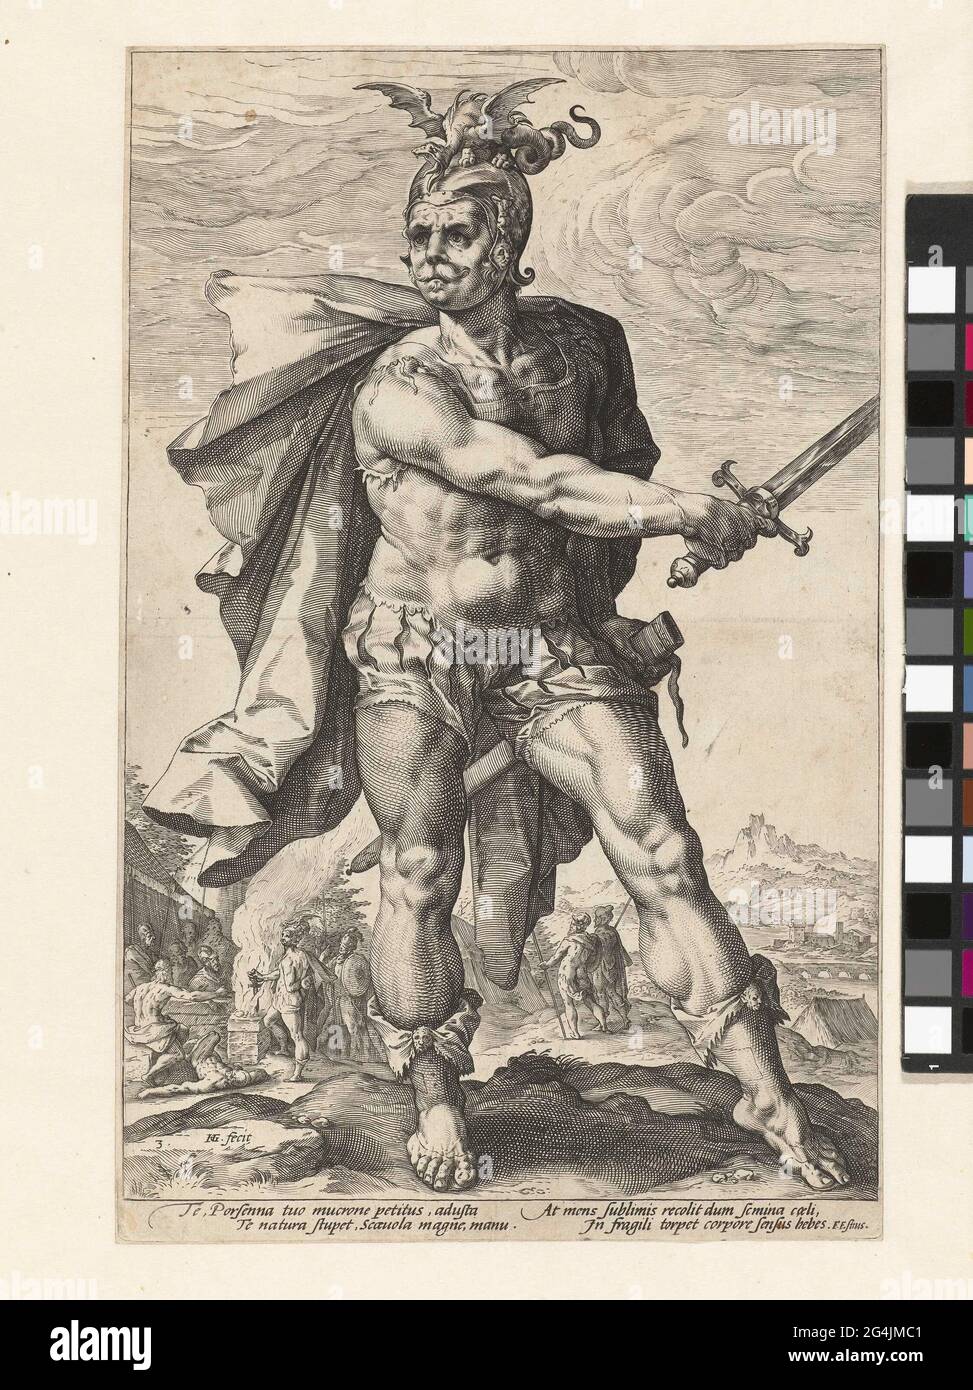 . The Held Gaius Mucius Scaevola for feet, a sword in the right hand, the sheath in the left hand. In the background you can see how he protrudes his right hand before King Porna fearless. Under the show twice two fresh rules in Latin. This print is part of a series of ten prints, consisting of an unnumbered title print, eight numbered representations of heroes and an unnumbered concluding print. Stock Photo